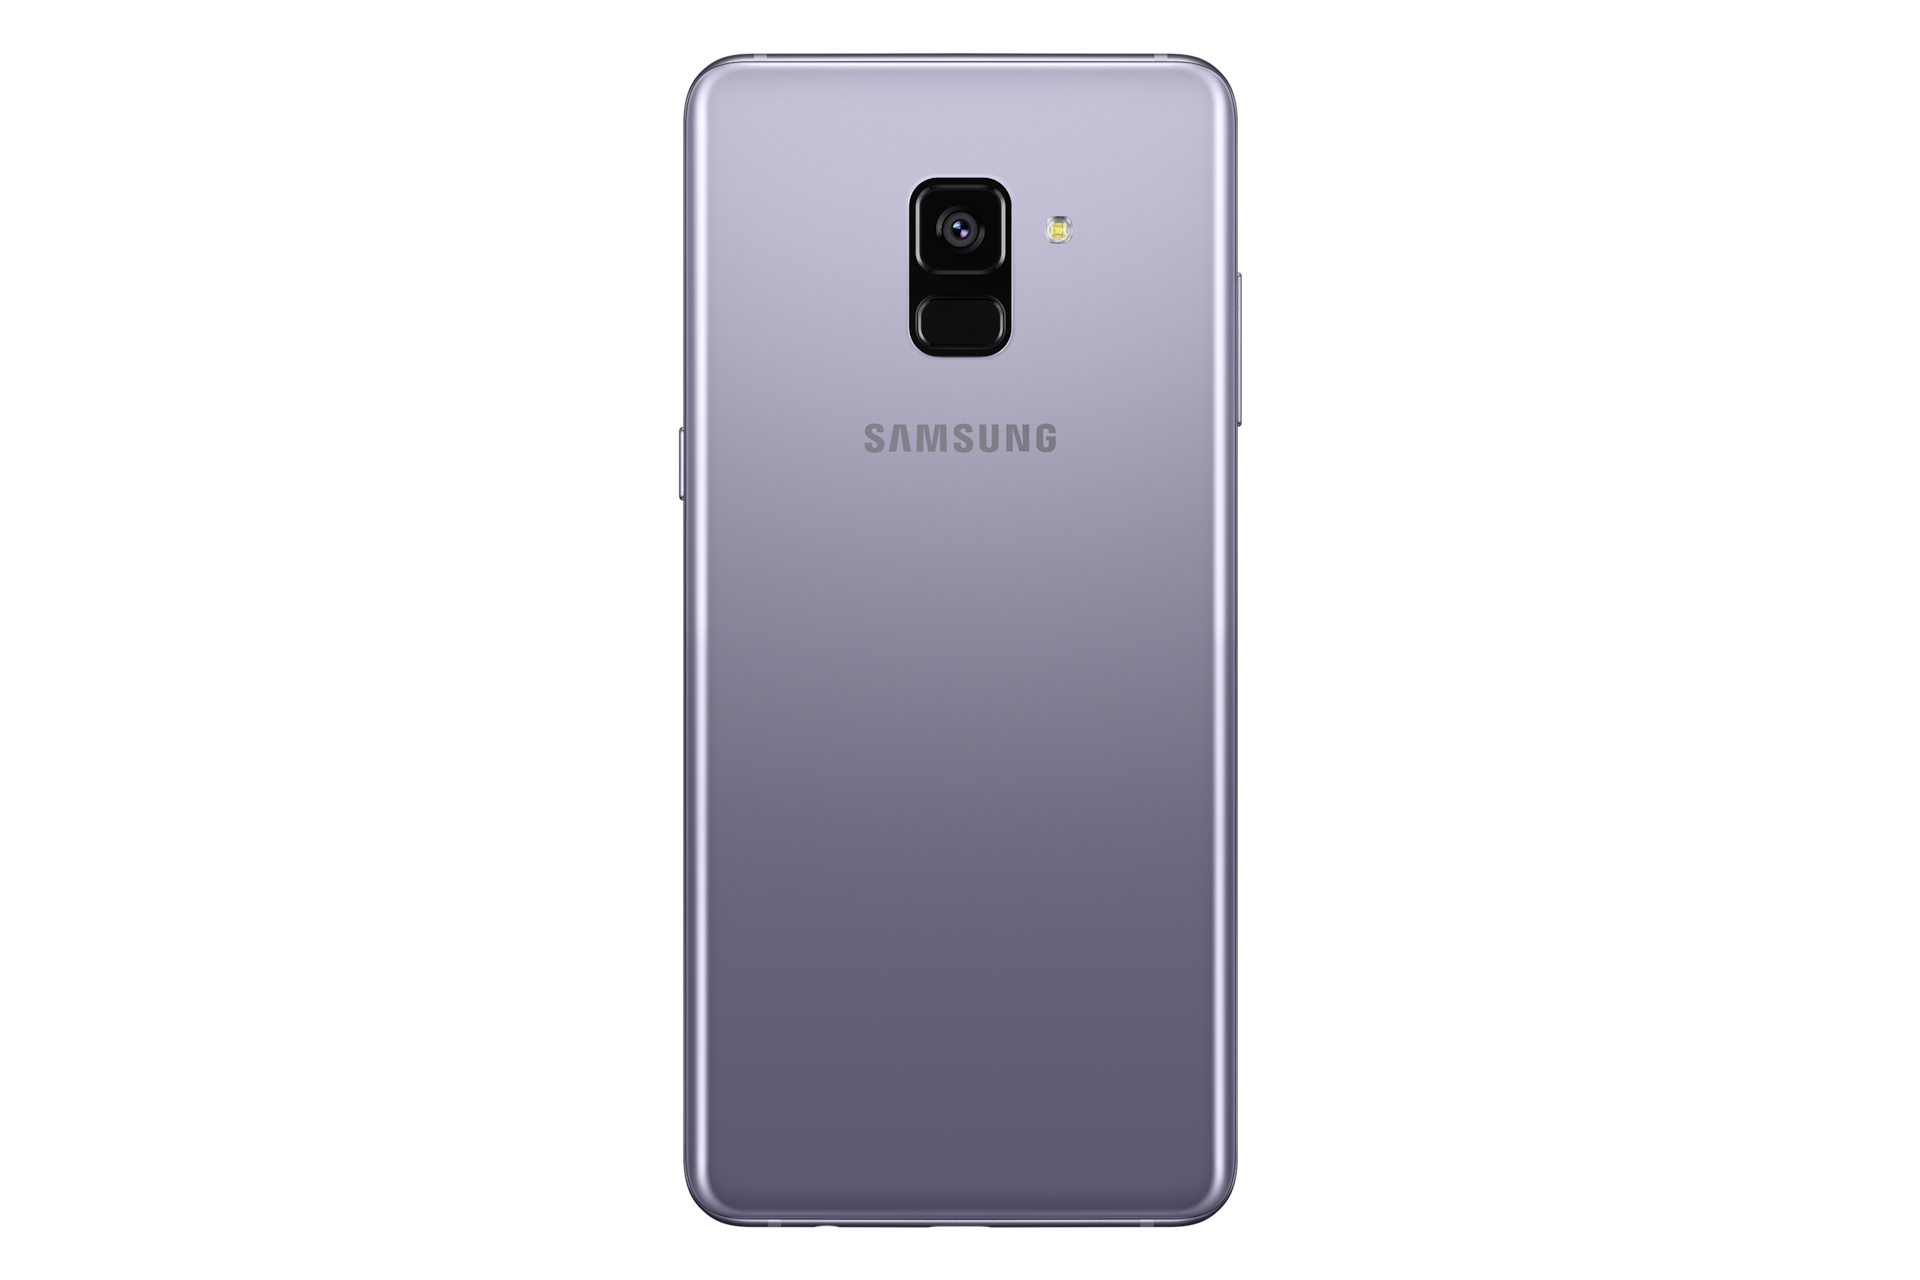 Samsung Galaxy A8+ (2018) Price in Malaysia, Specs & Review